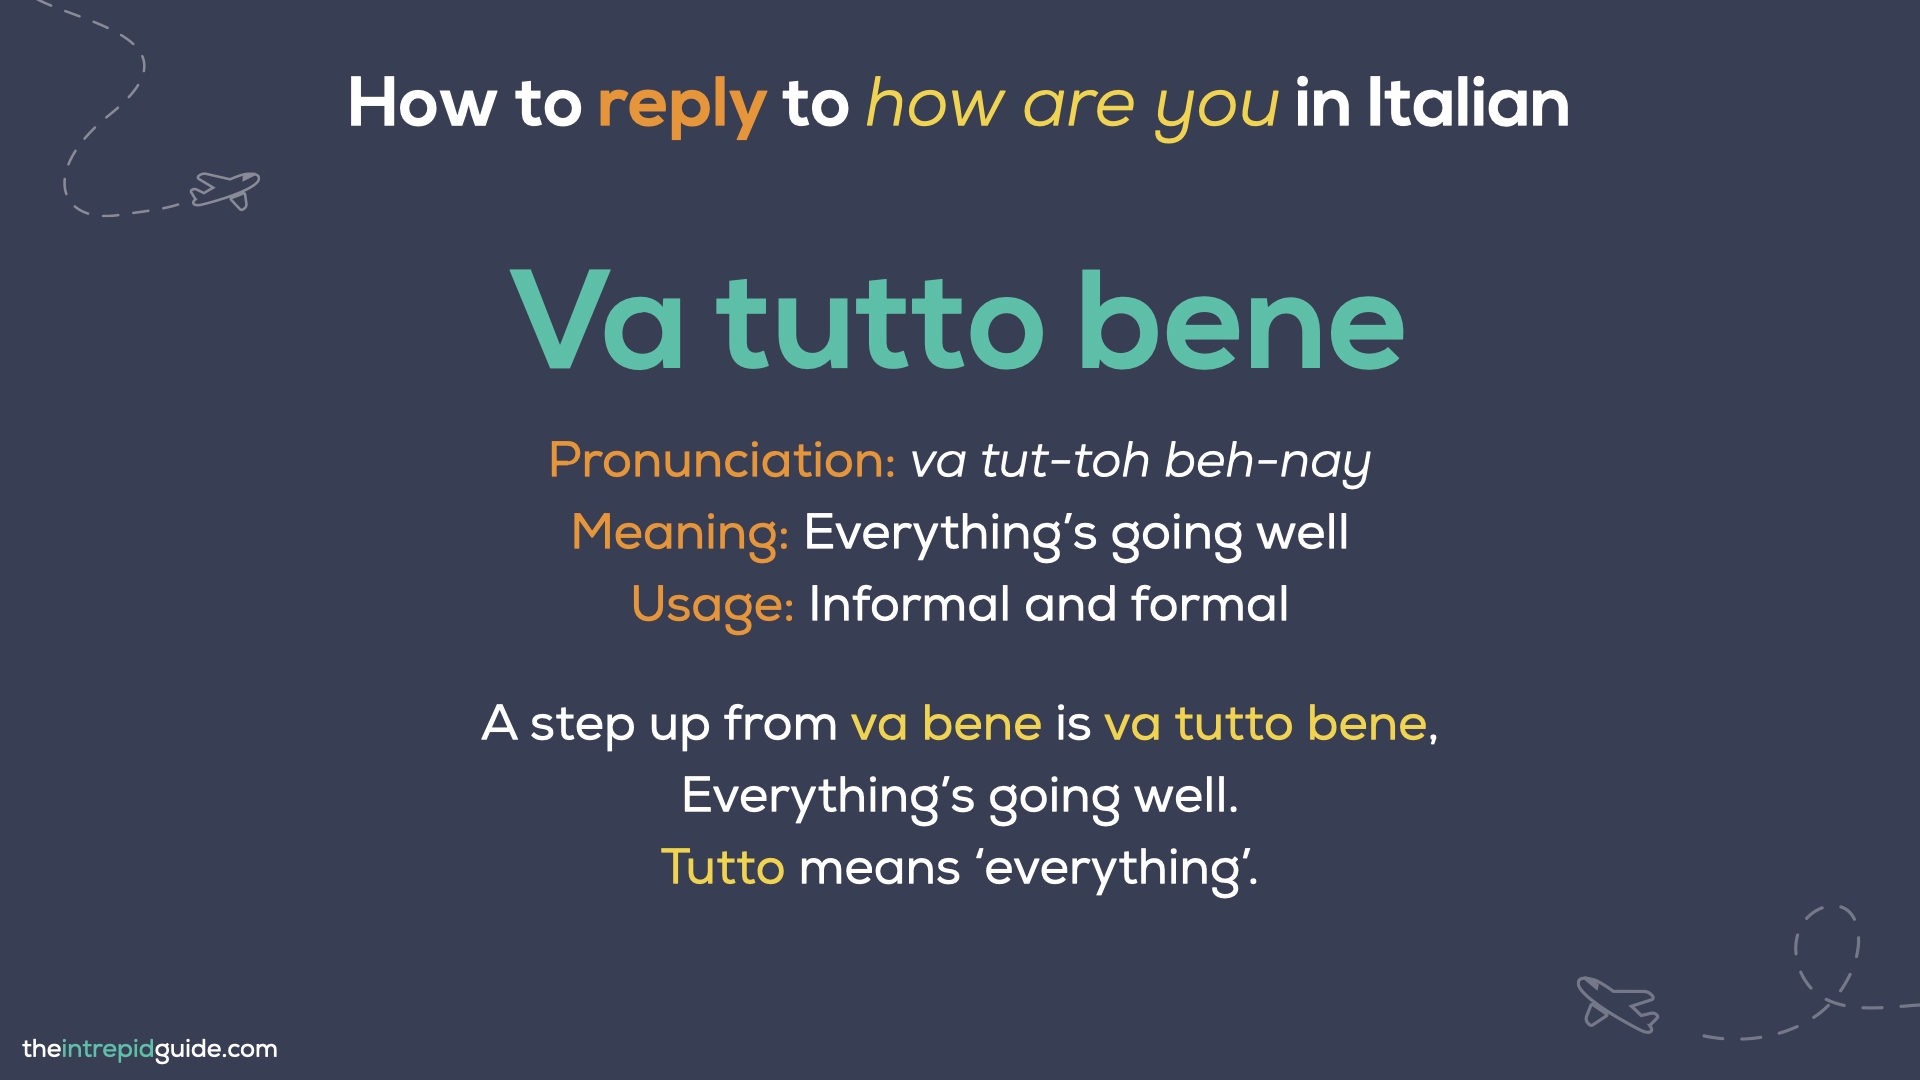 How to say How are you in Italian - Va tutto bene